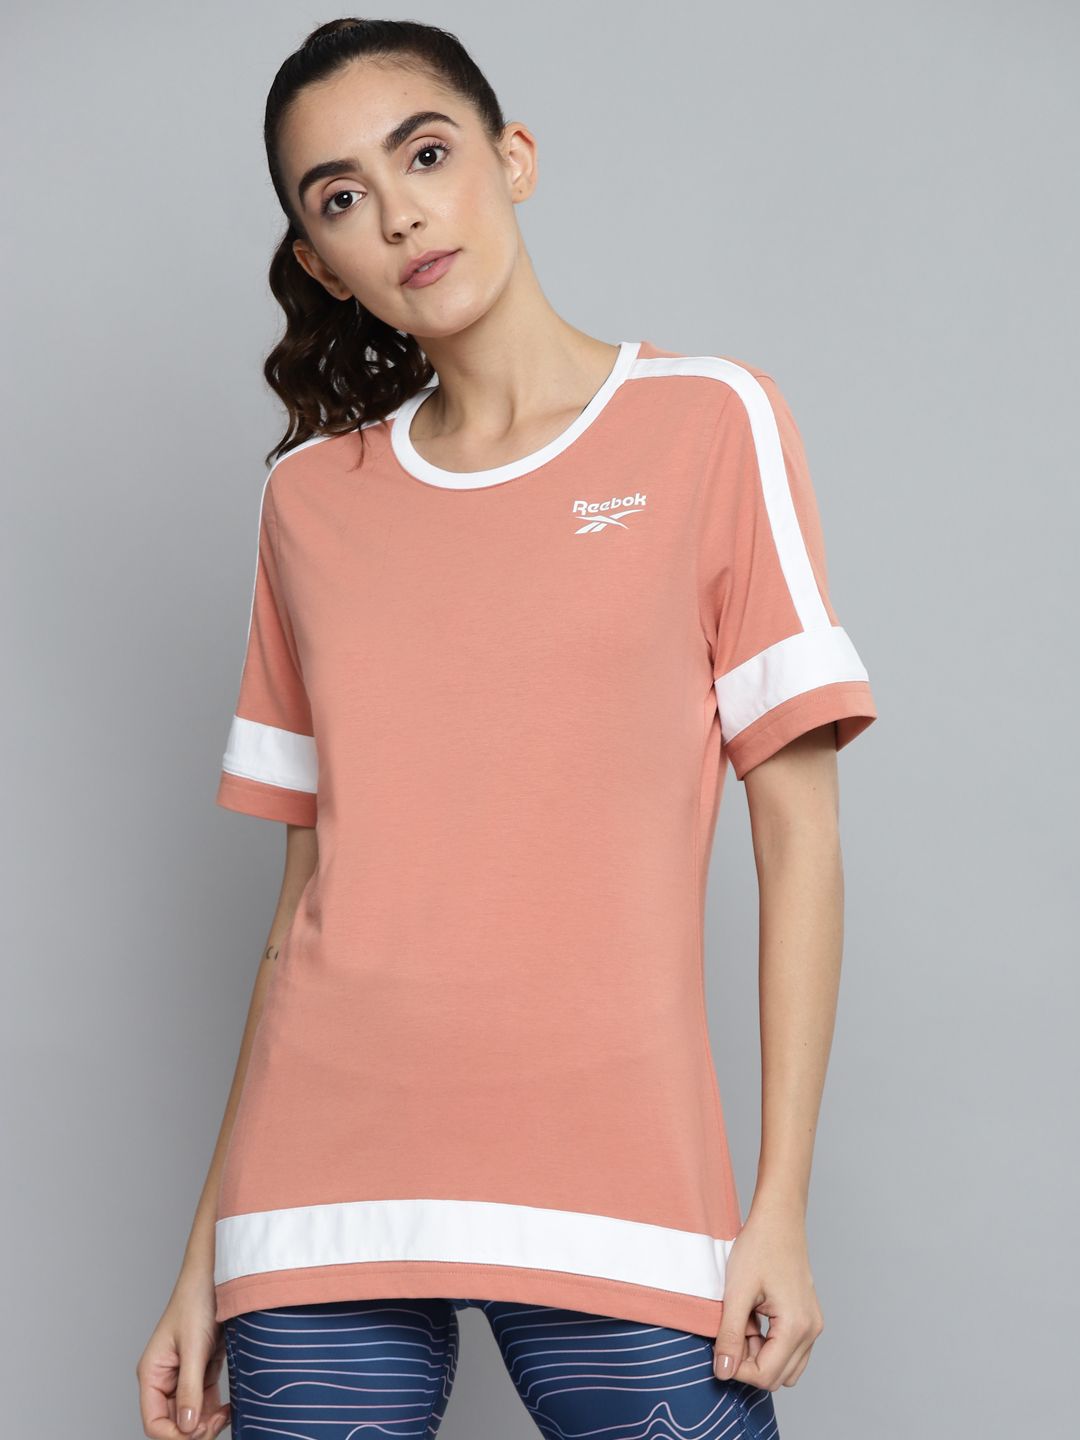 Reebok Classic Women Dusty Pink WCE TEE 3 Solid Pure Cotton T-shirt Price in India